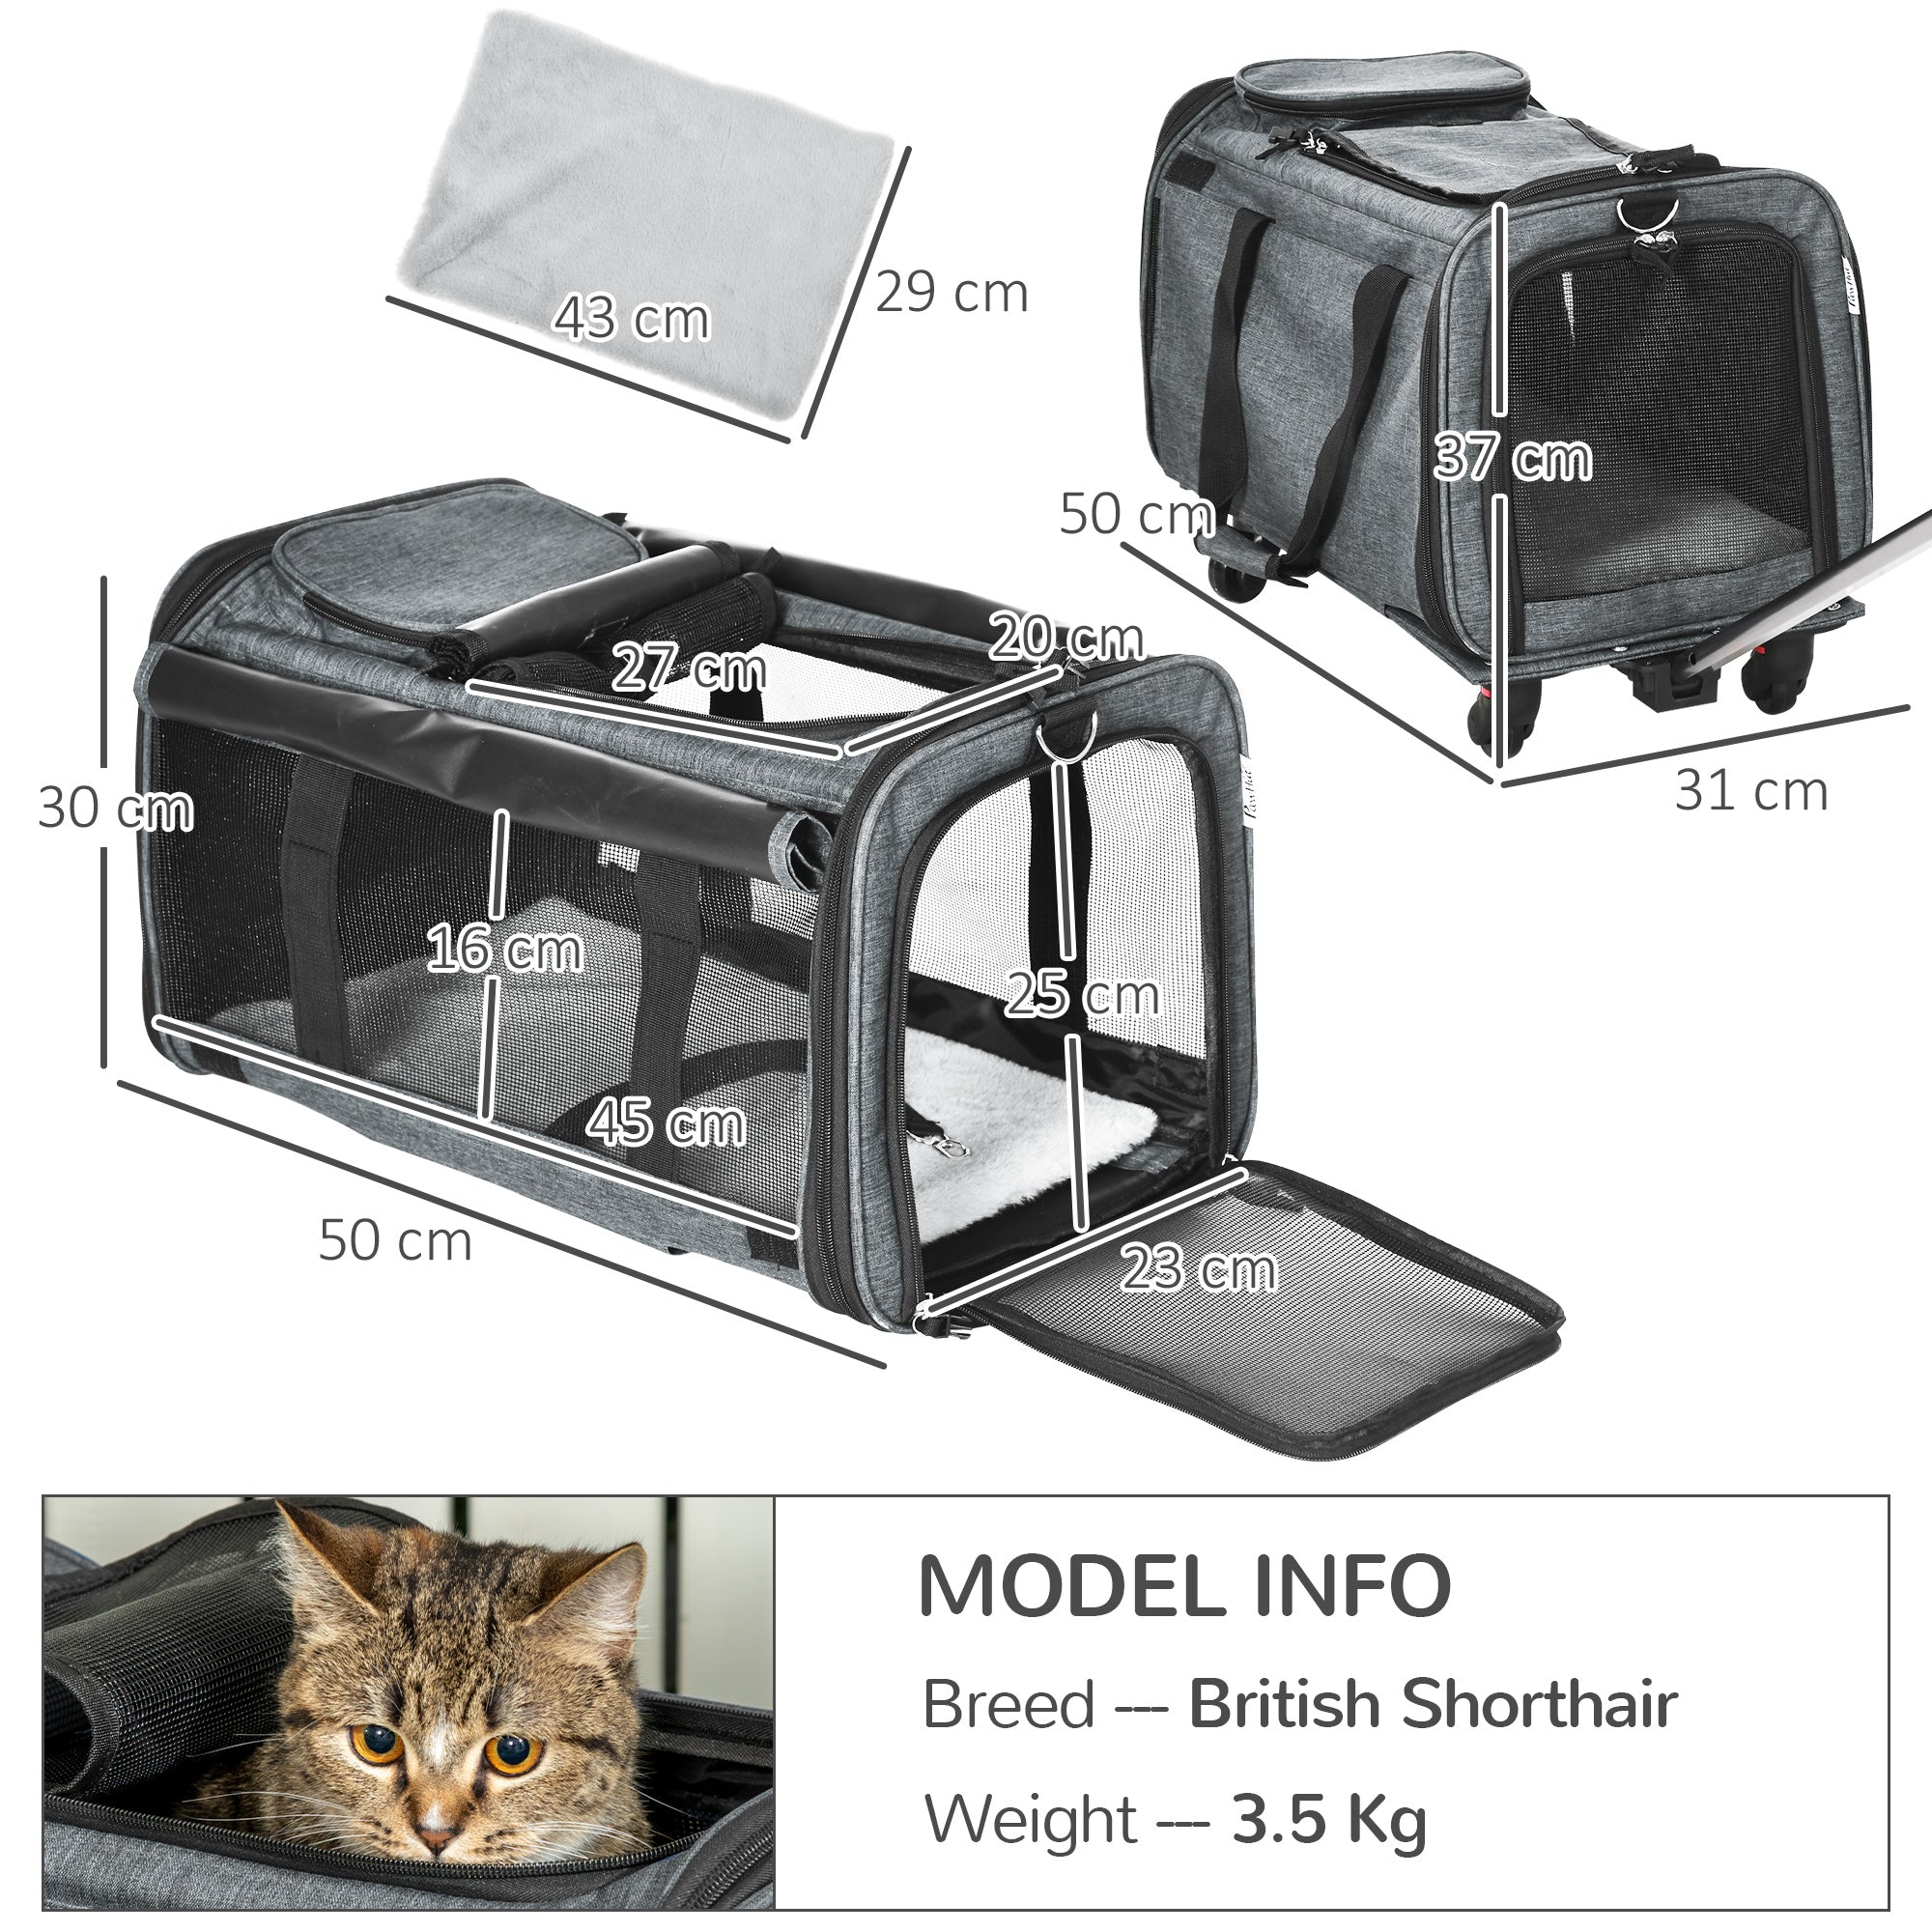 PawHut 4 in 1 Pet Carrier Portable Cat Carrier Foldable Dog Bag On Wheels for Cats, Miniature Dogs w/ Telescopic Handle, Grey